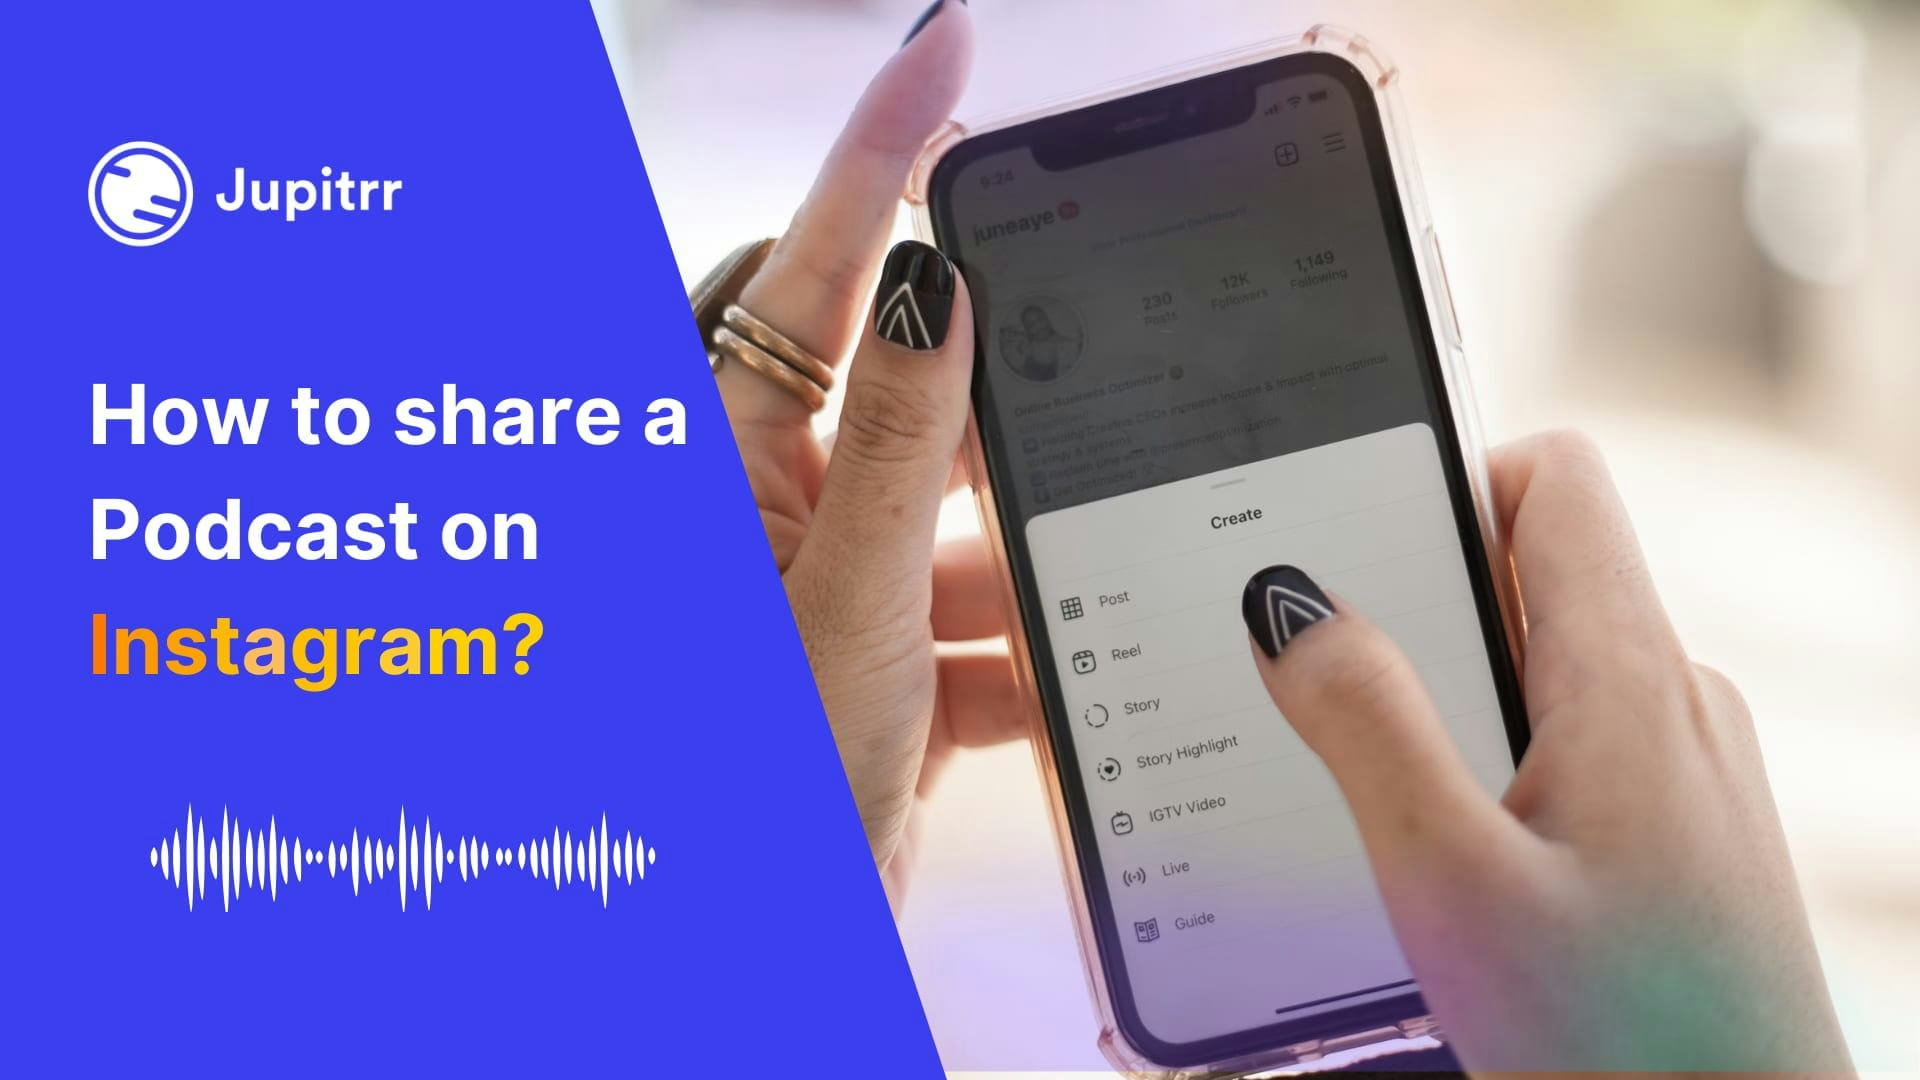 How to share a Podcast on Instagram Story and Post?